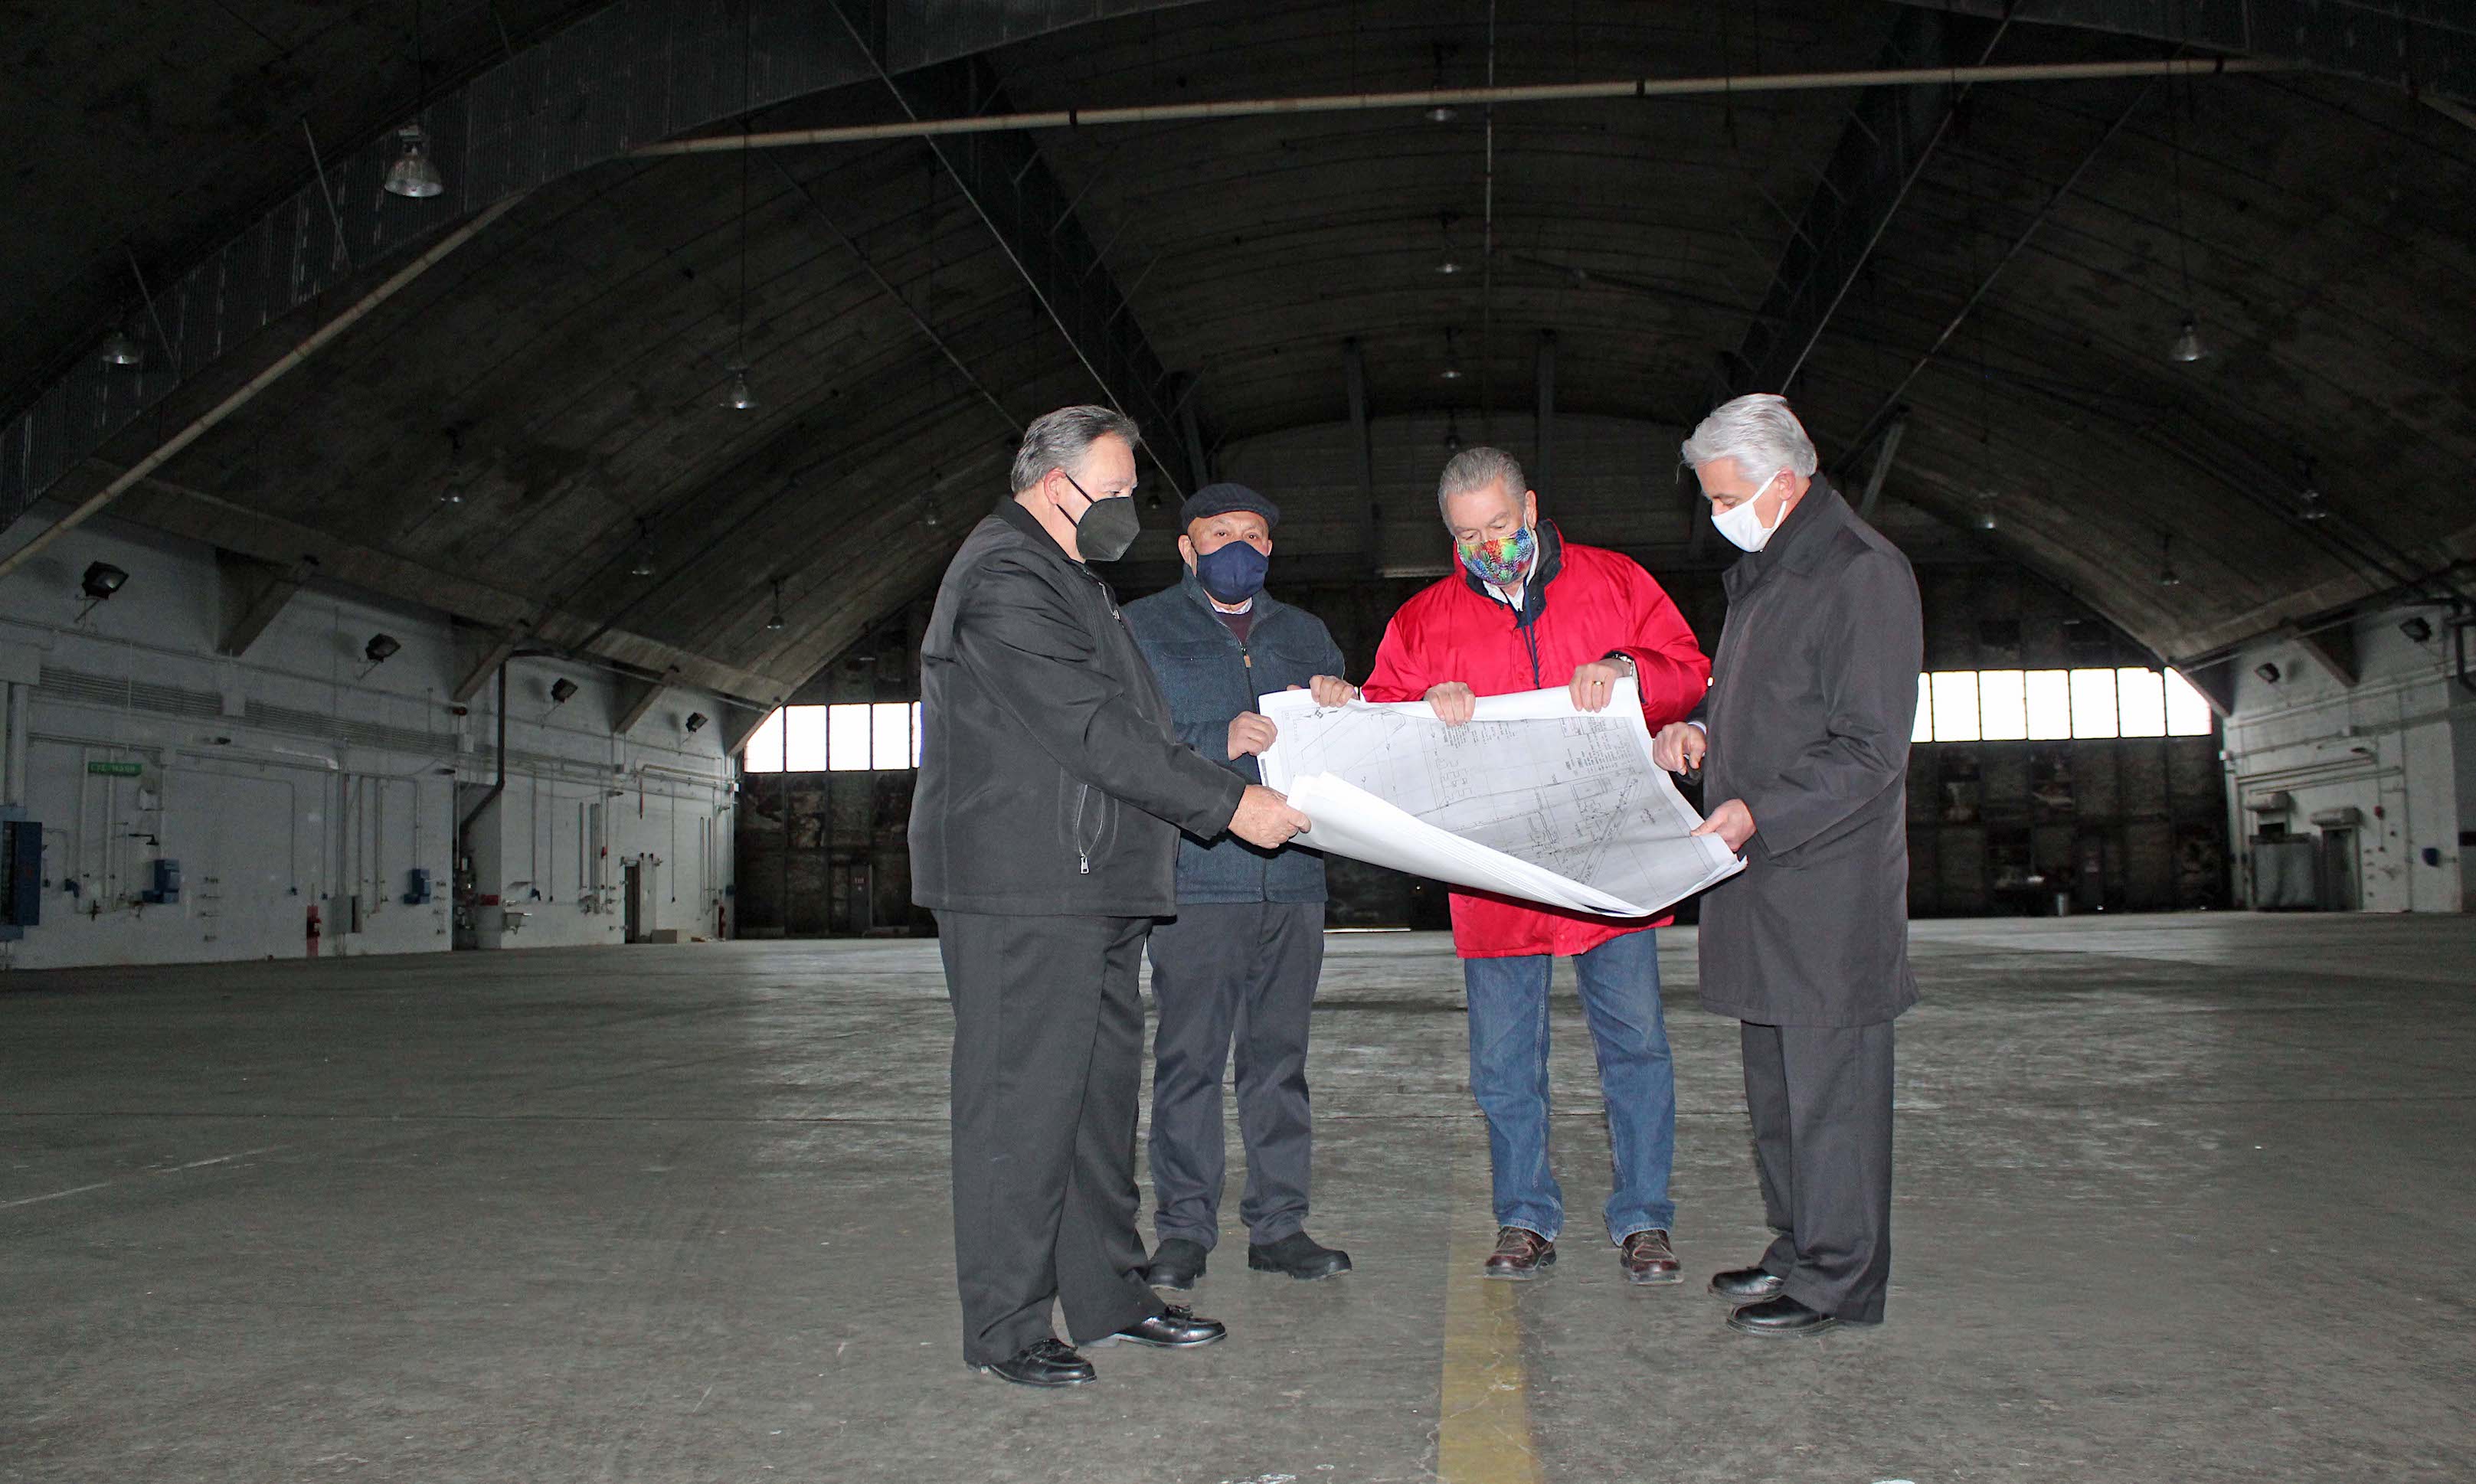 Pictured, from left: Town of Niagara Supervisor Lee Wallace, Assemblyman Angelo Morinello, John R. Simon and Niagara Falls Mayor Robert Restaino, in the 47,000-square-foot hangar, review the facility blue print.